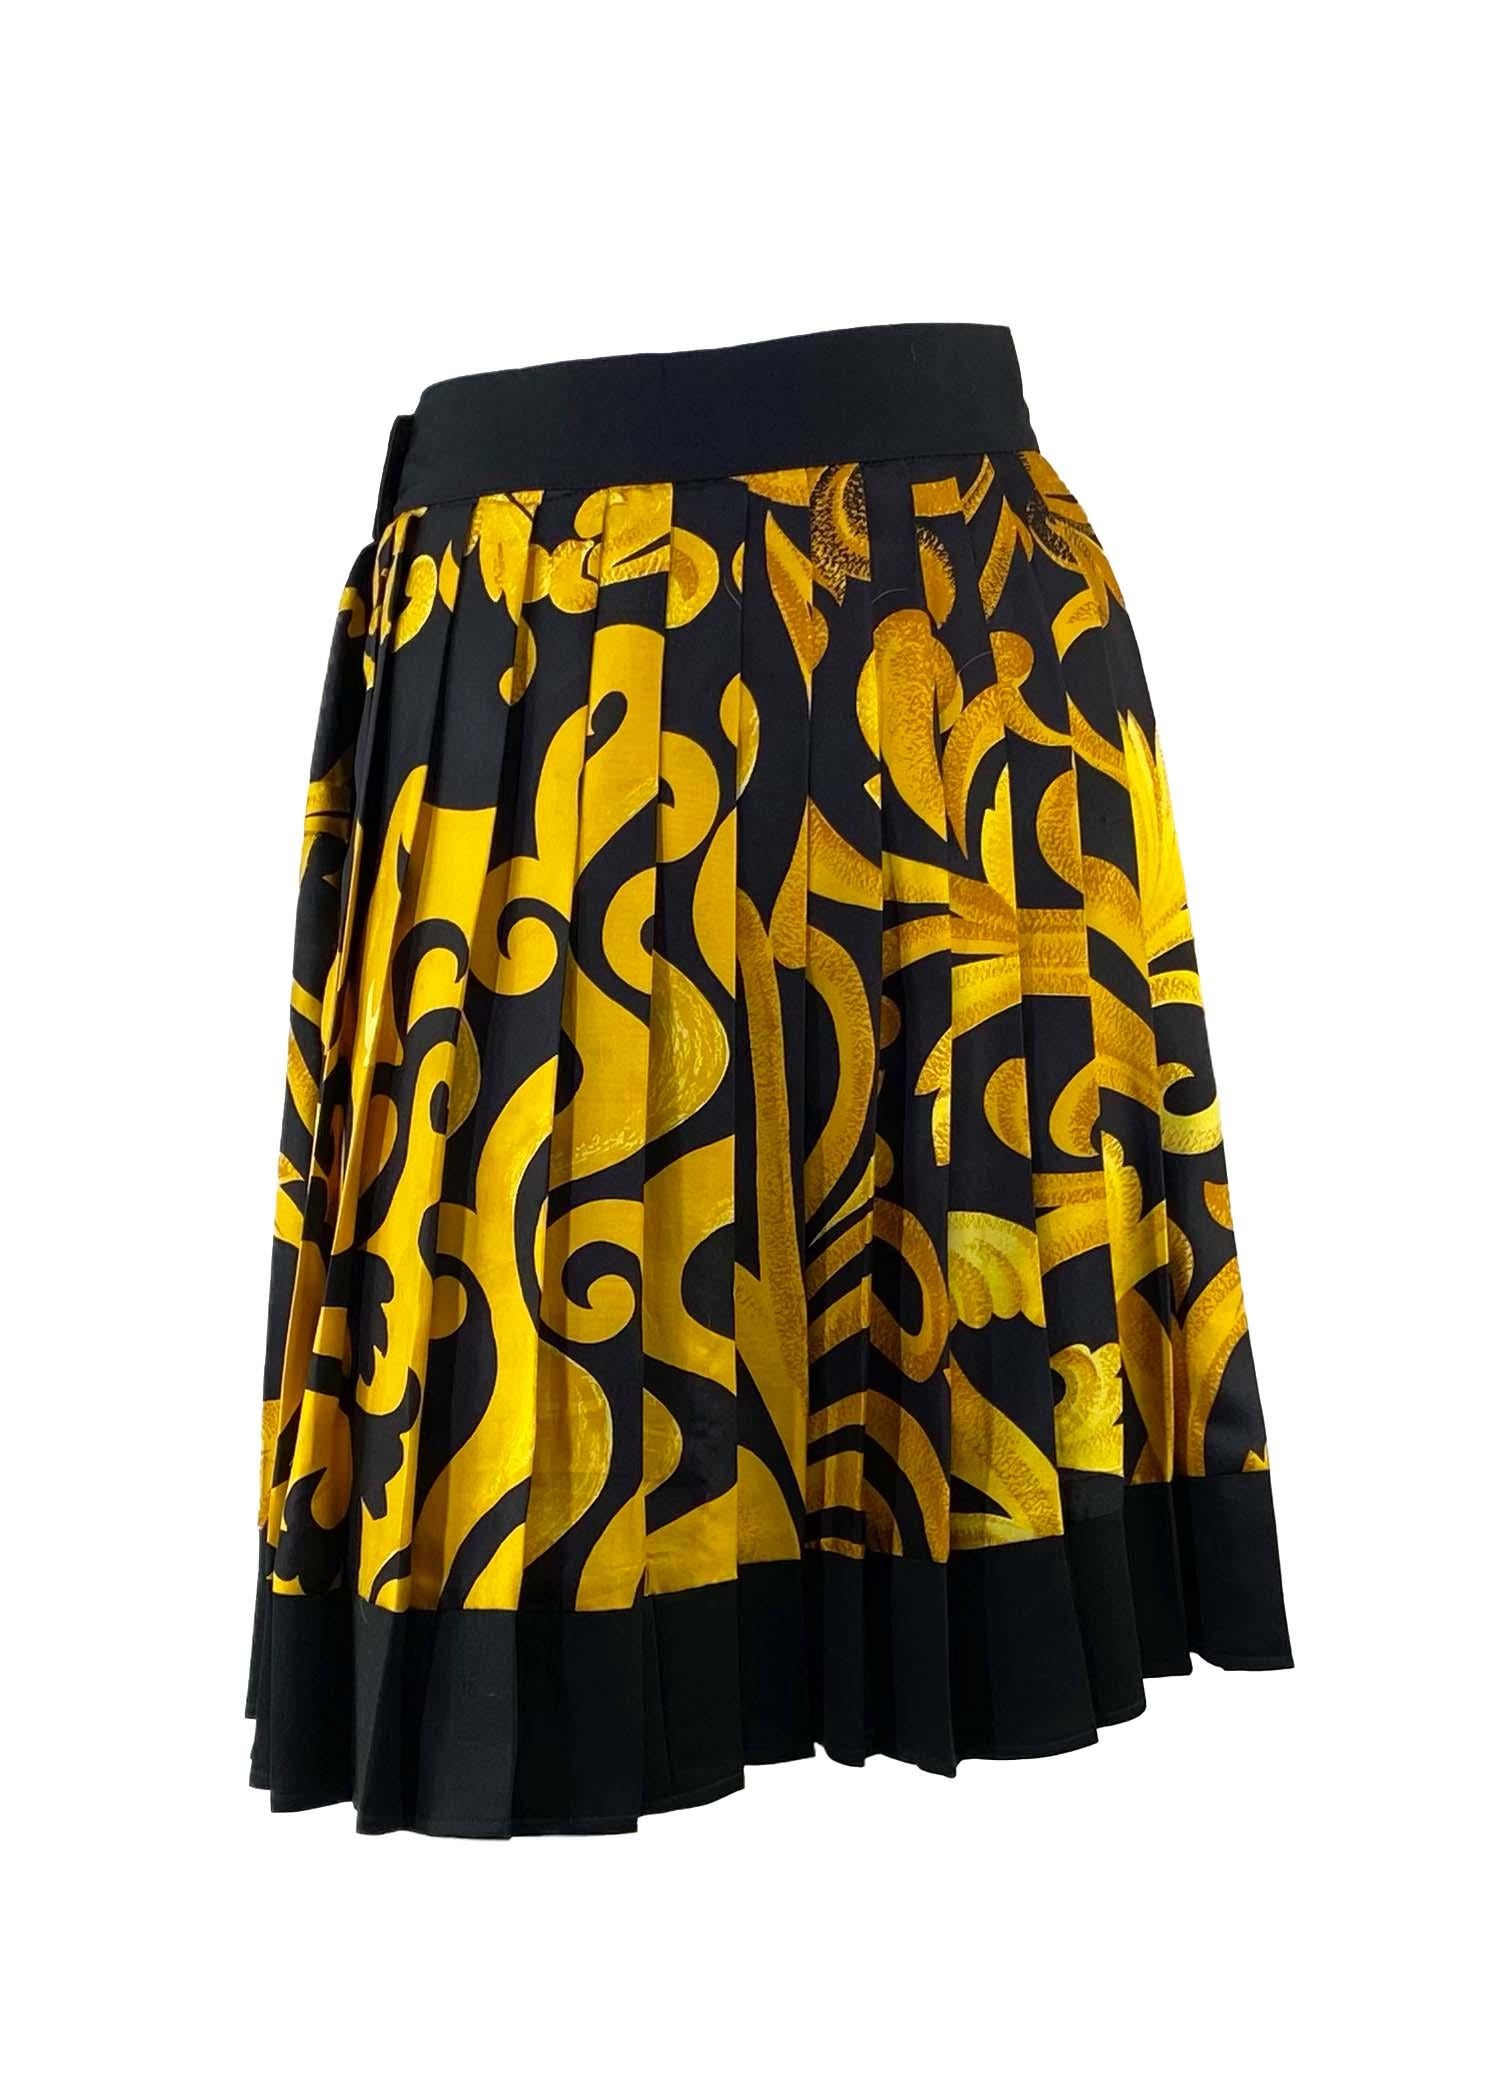 Women's F/W 1991 Gianni Versace Couture Black Gold Baroque Print Silk Pleated Skirt Suit For Sale